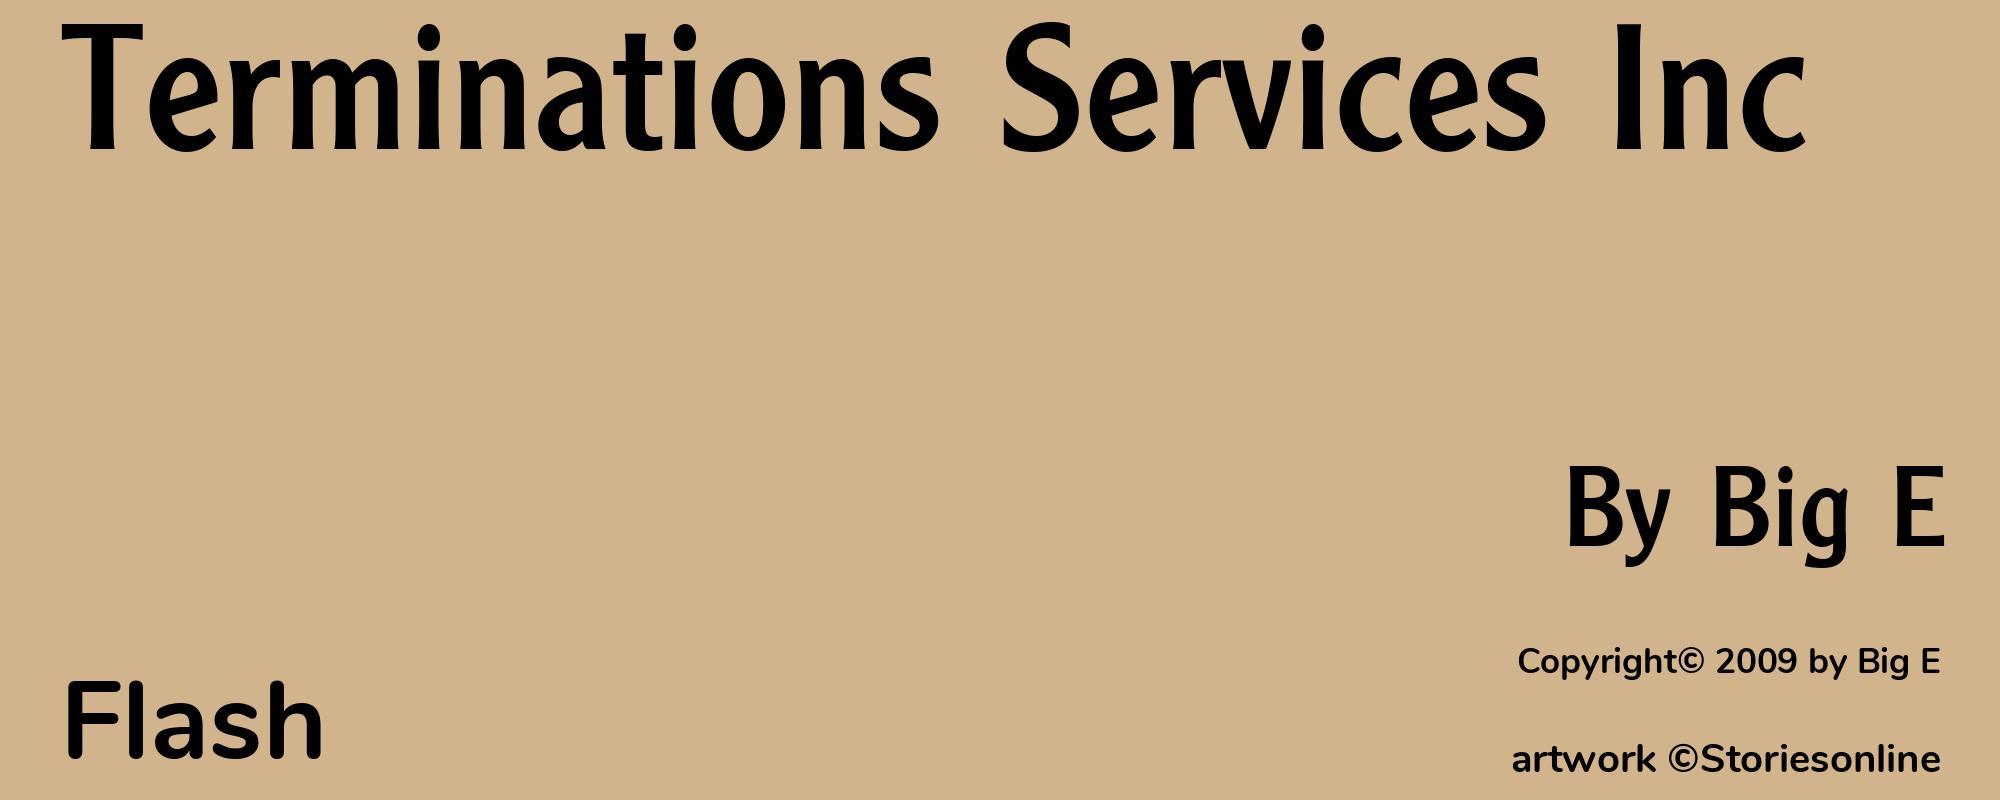 Terminations Services Inc - Cover